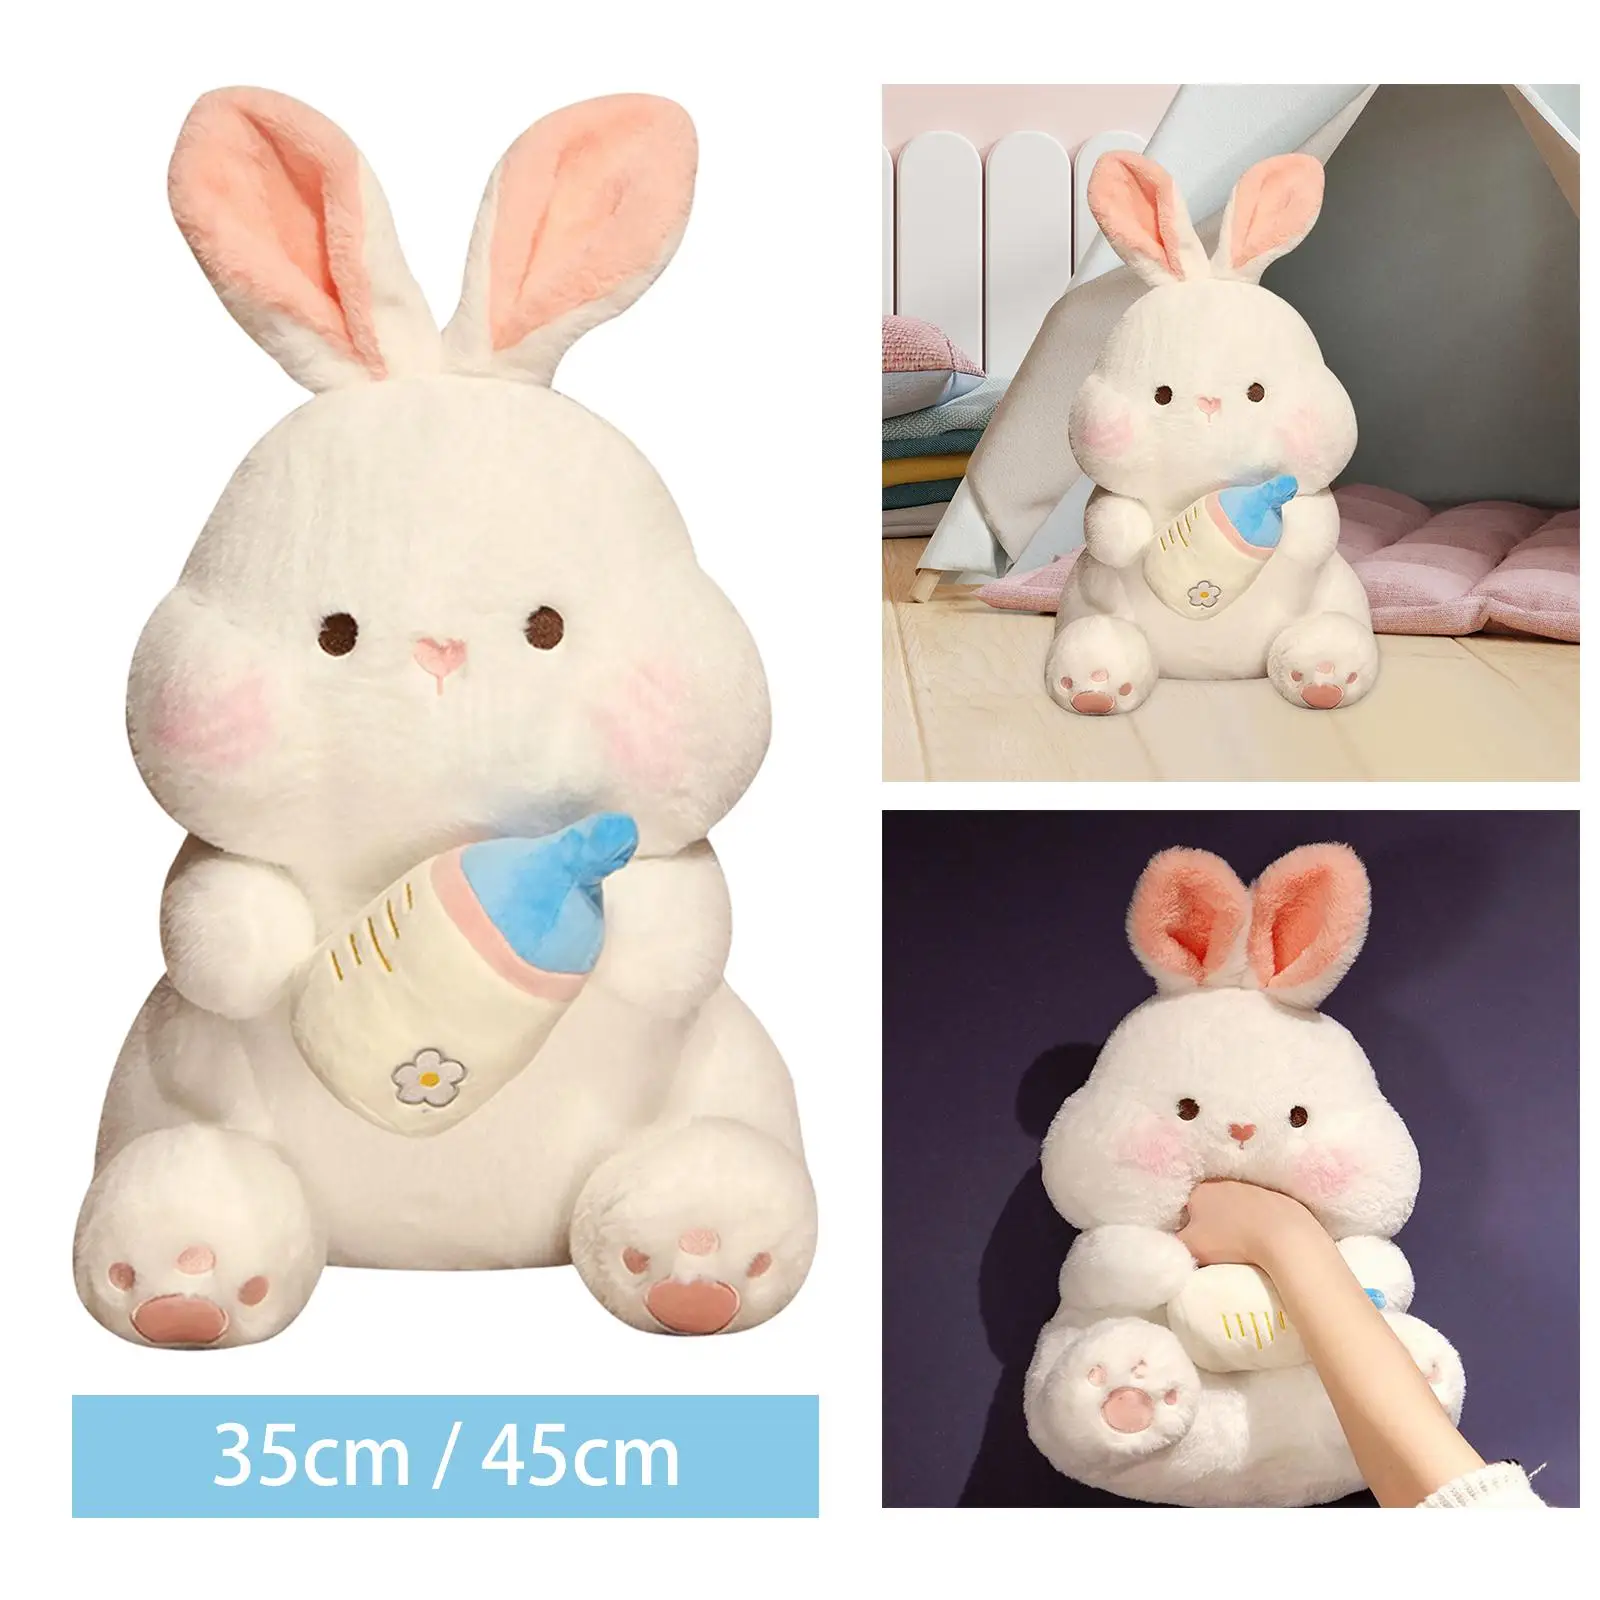 

Rabbit Plush Toy Cute Cushion bunny Stuffed Animal Toy Sleeping Hugging Pillows Easter Bunny for Valentine Easter Halloween